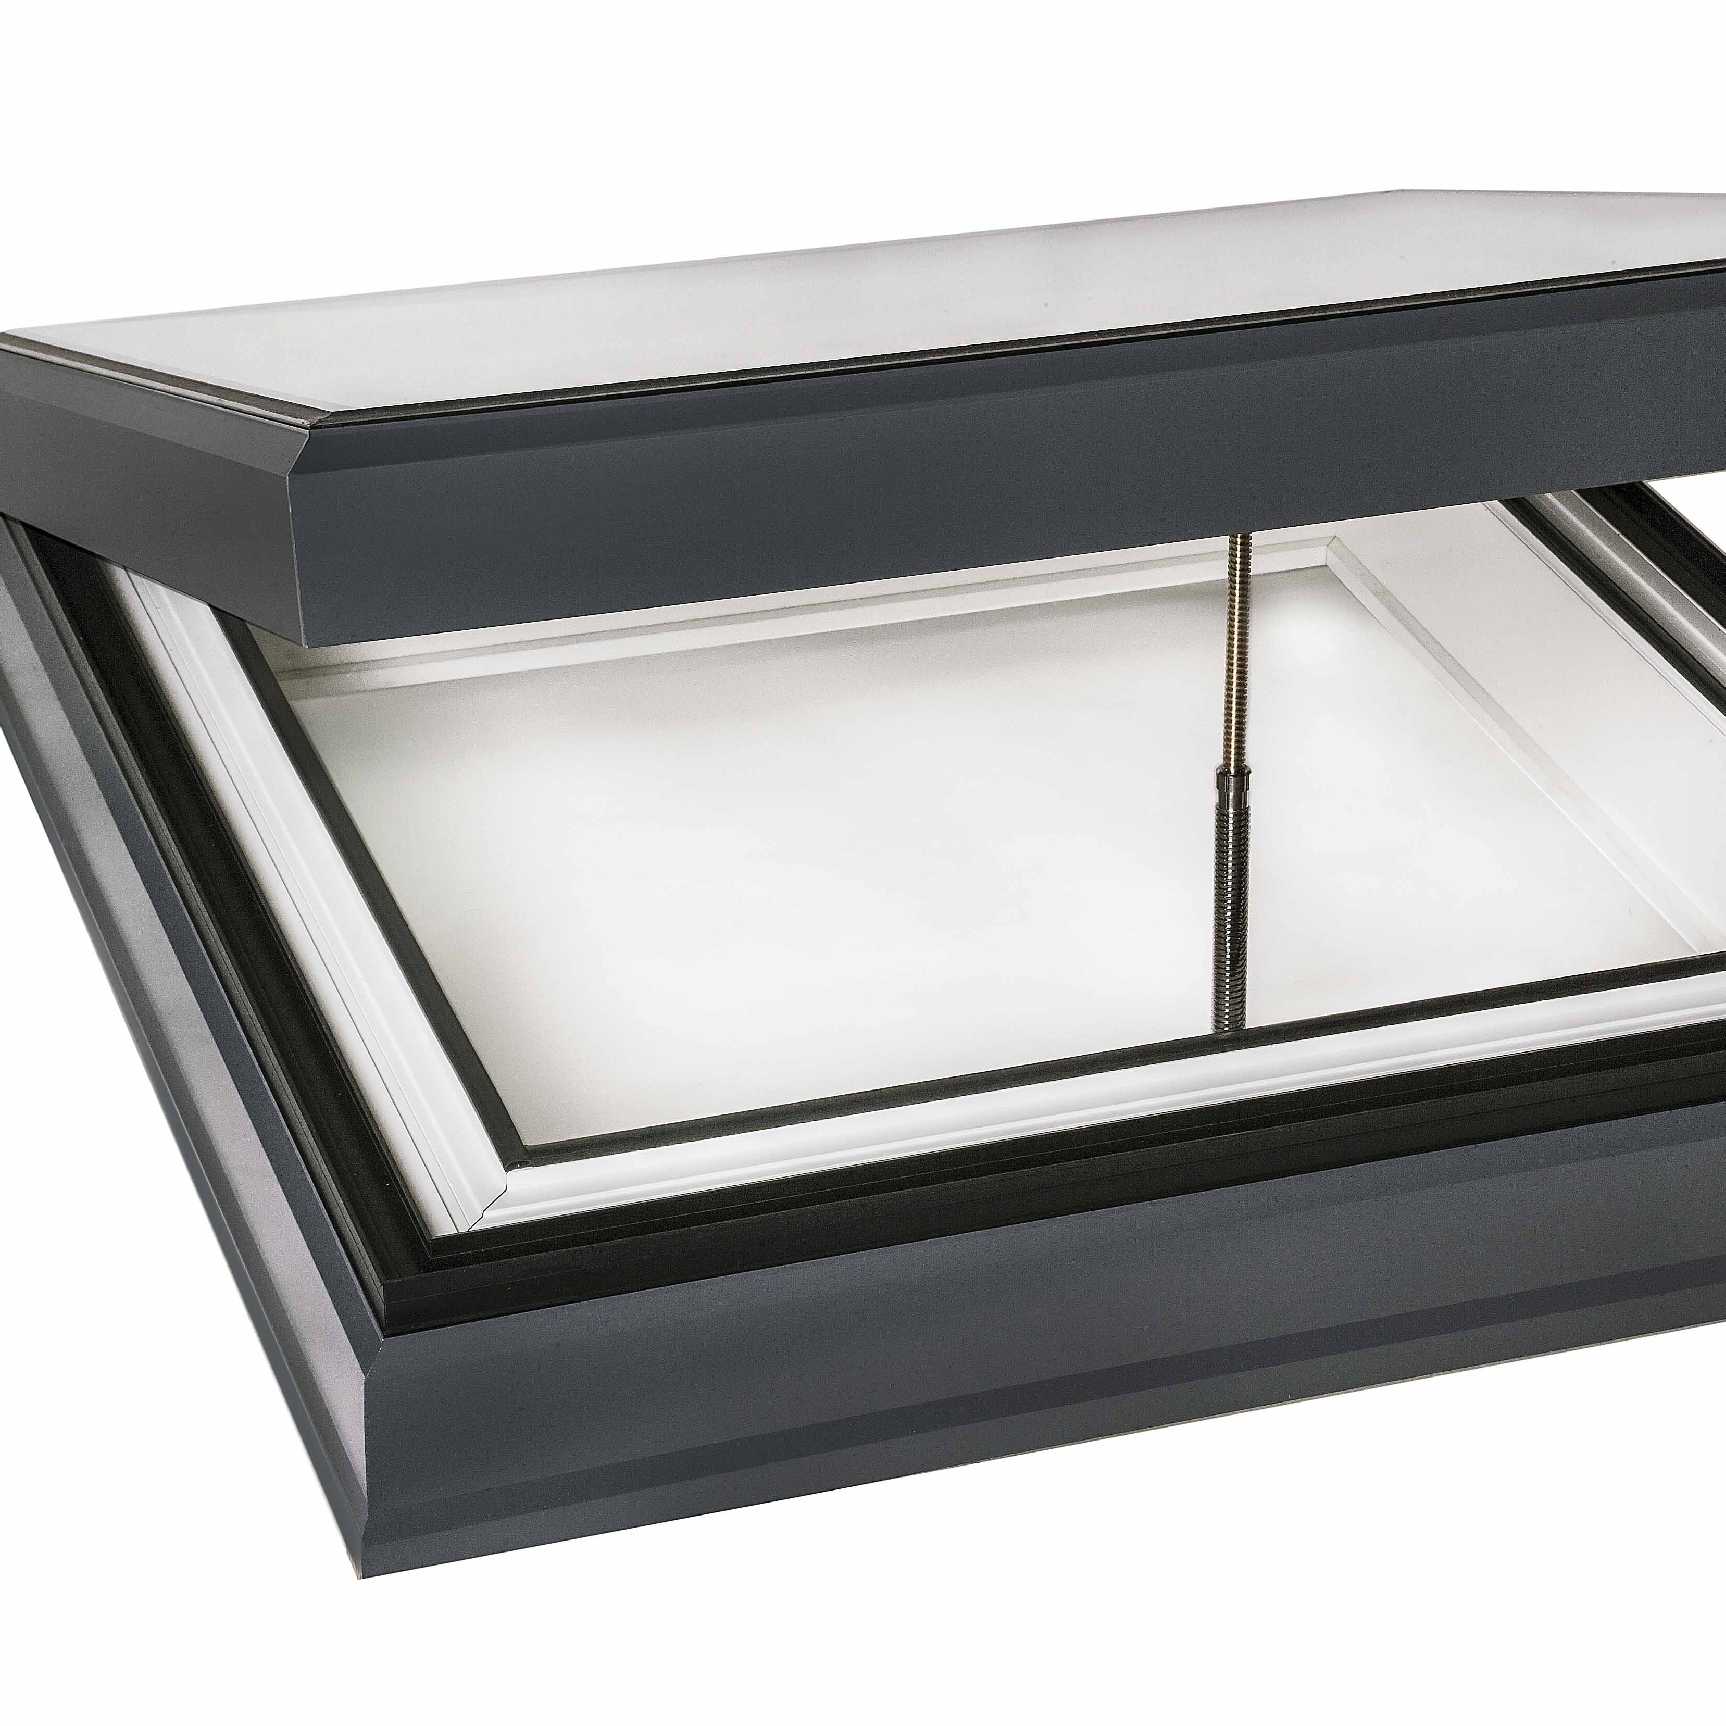 Great deals on EcoGard Flat Roof light, Double Glazed, Electric Opening, 1,000mm x 1,000mm